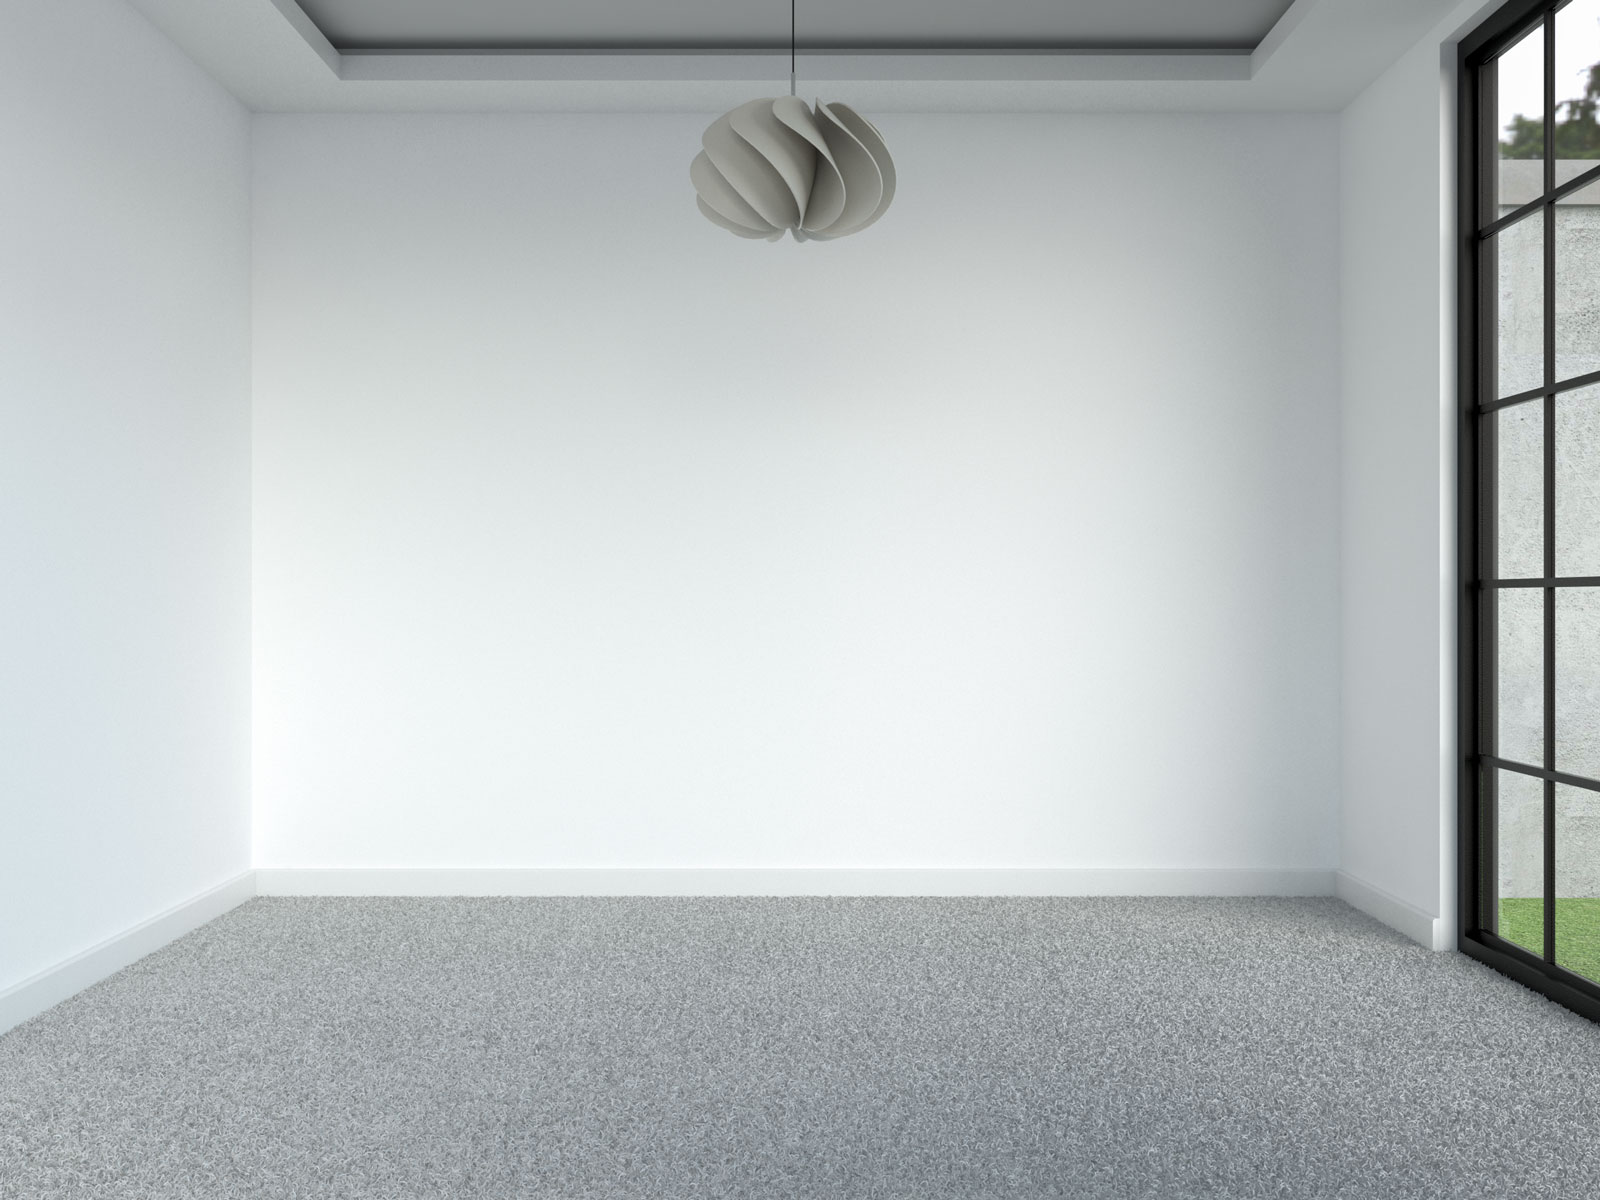 Pure white walls with gray carpet floors